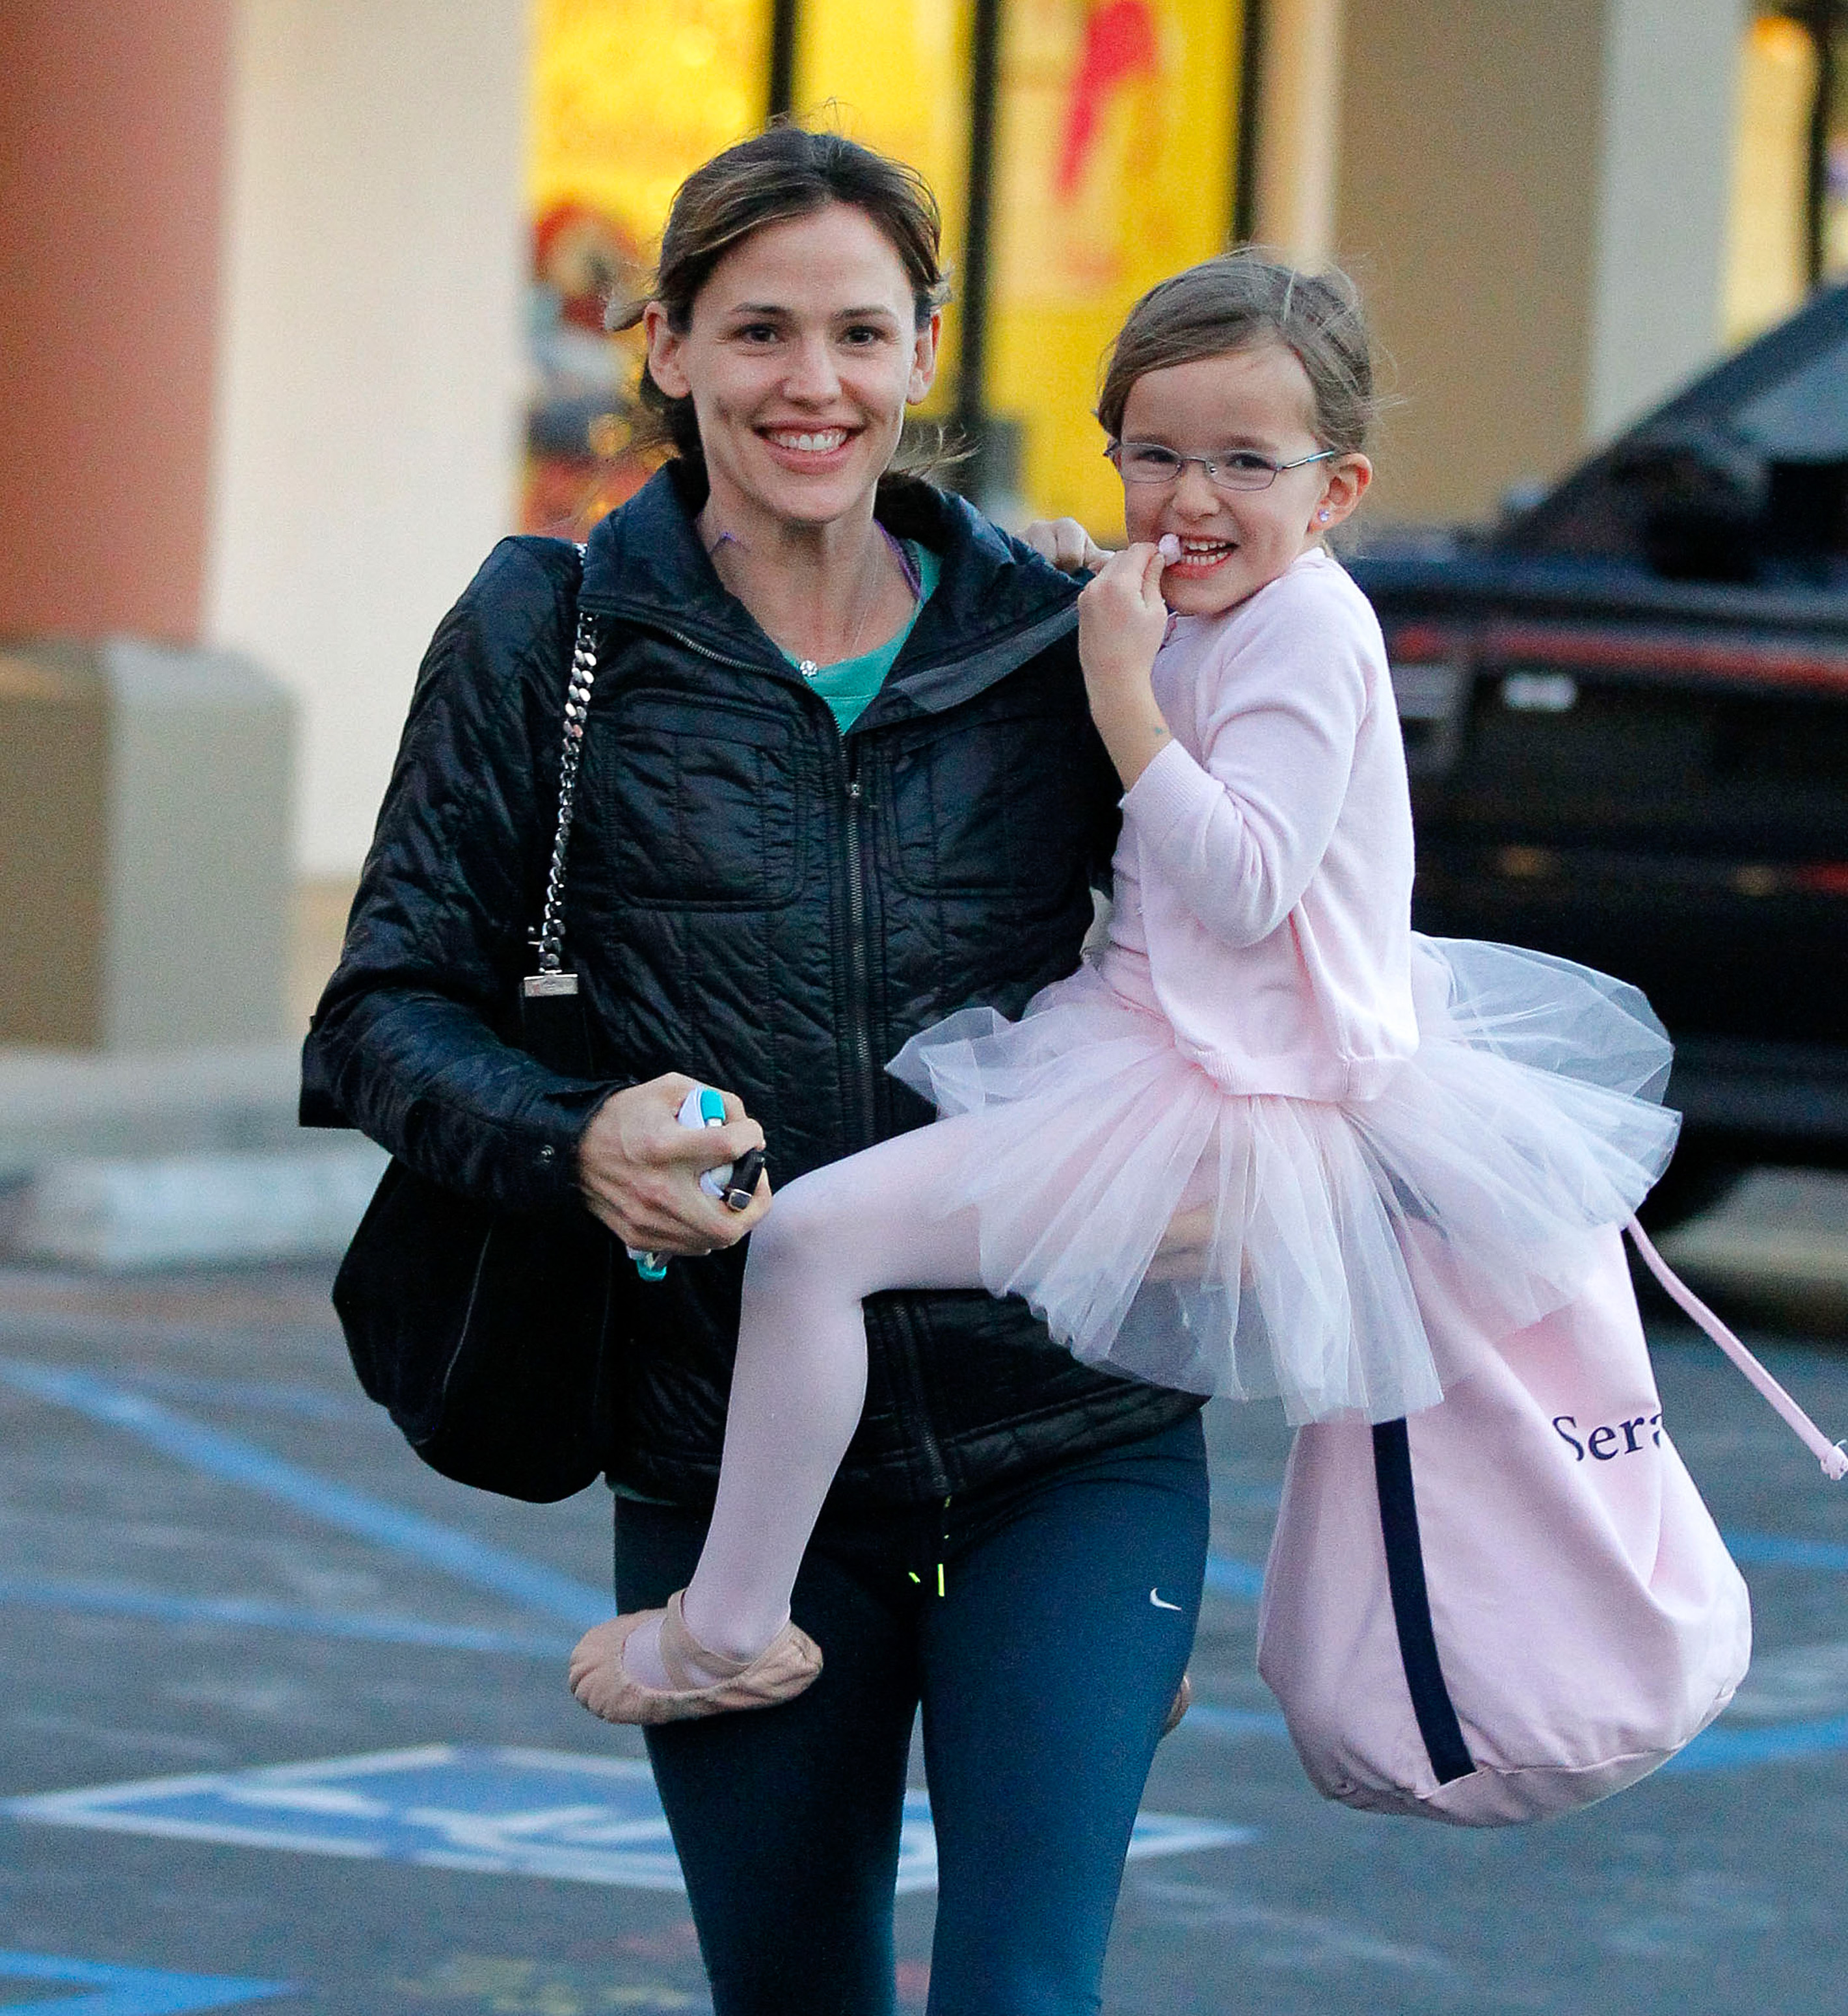 Jennifer Garner and Seraphina Affleck on December 13, 2013 in Los Angeles, California | Source: Getty Images